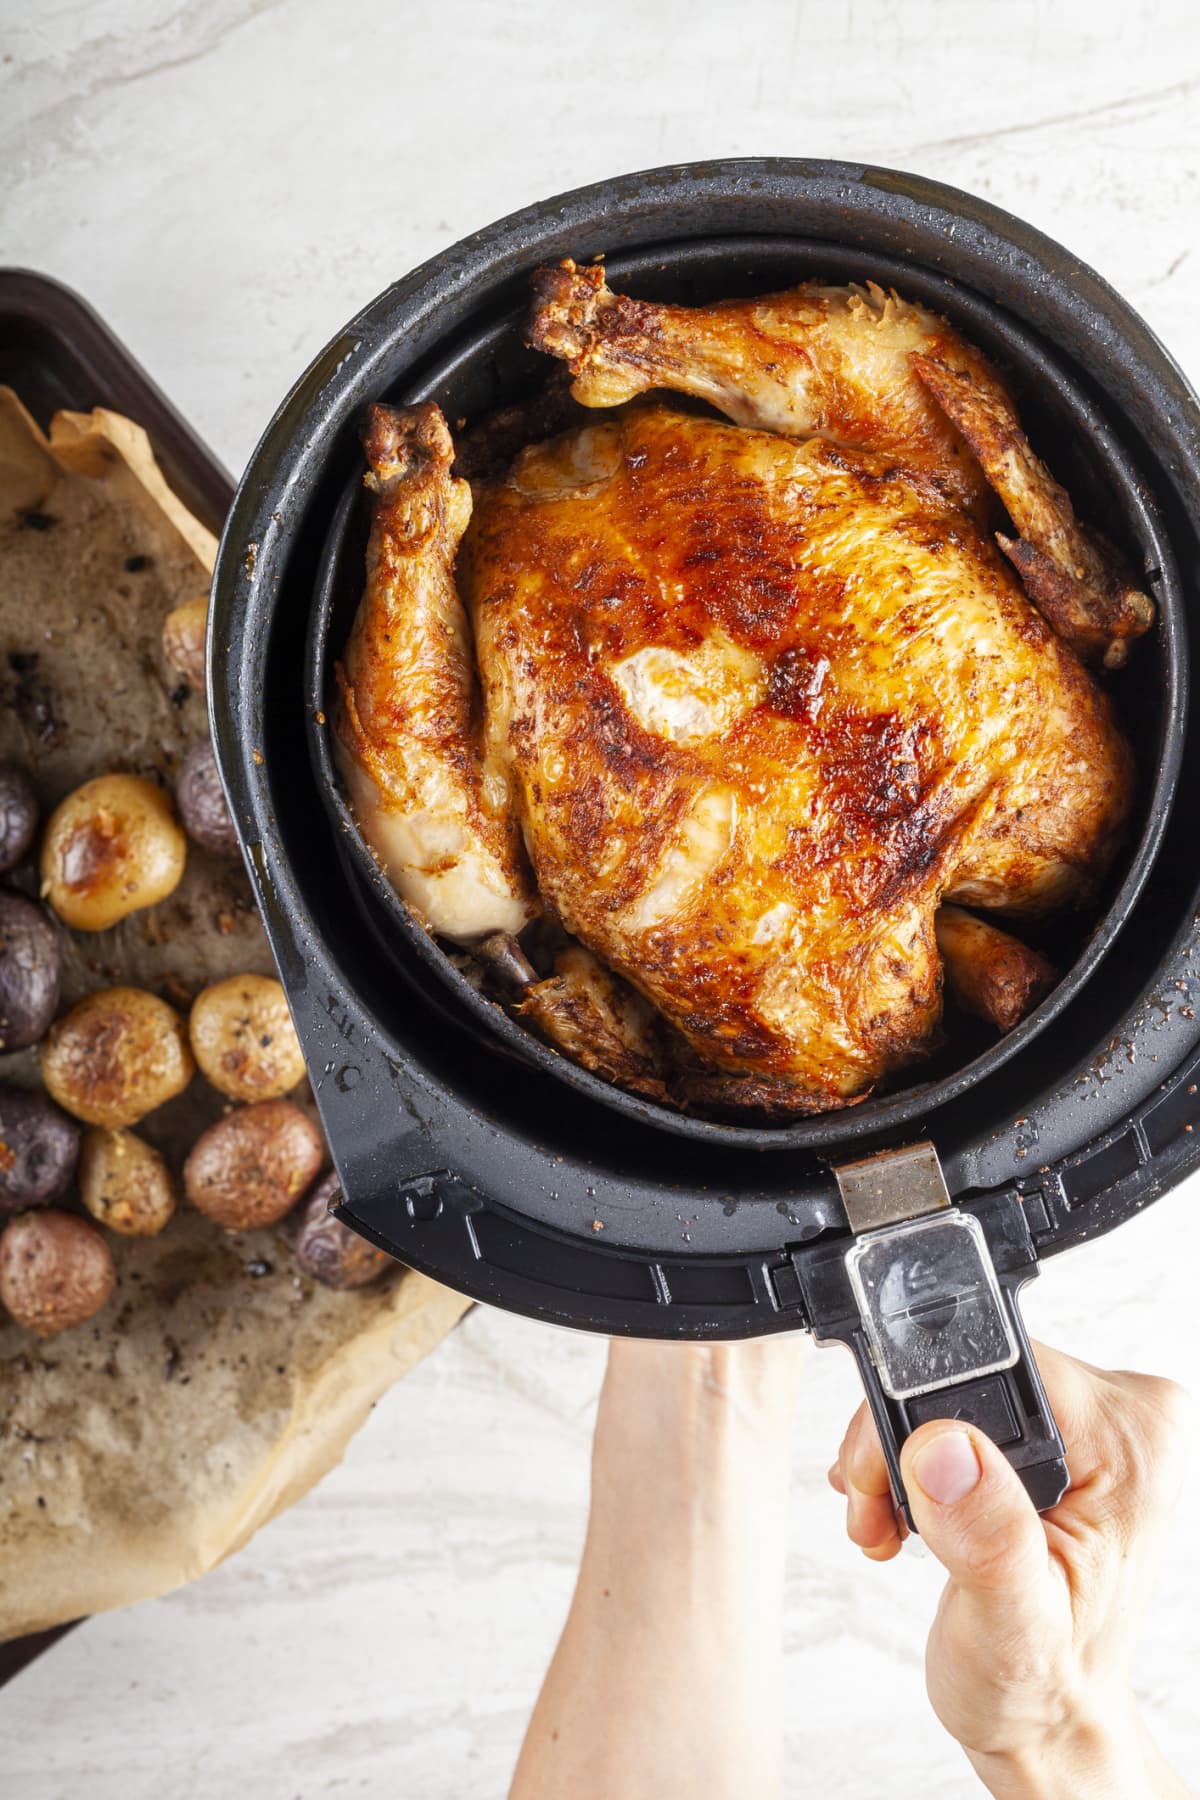 A whole chicken cooked inside an air frier concept. A healthy nutritious homemade alternative to deep fried store bought meat. Served inside the fryers basket together with baked potatoes.